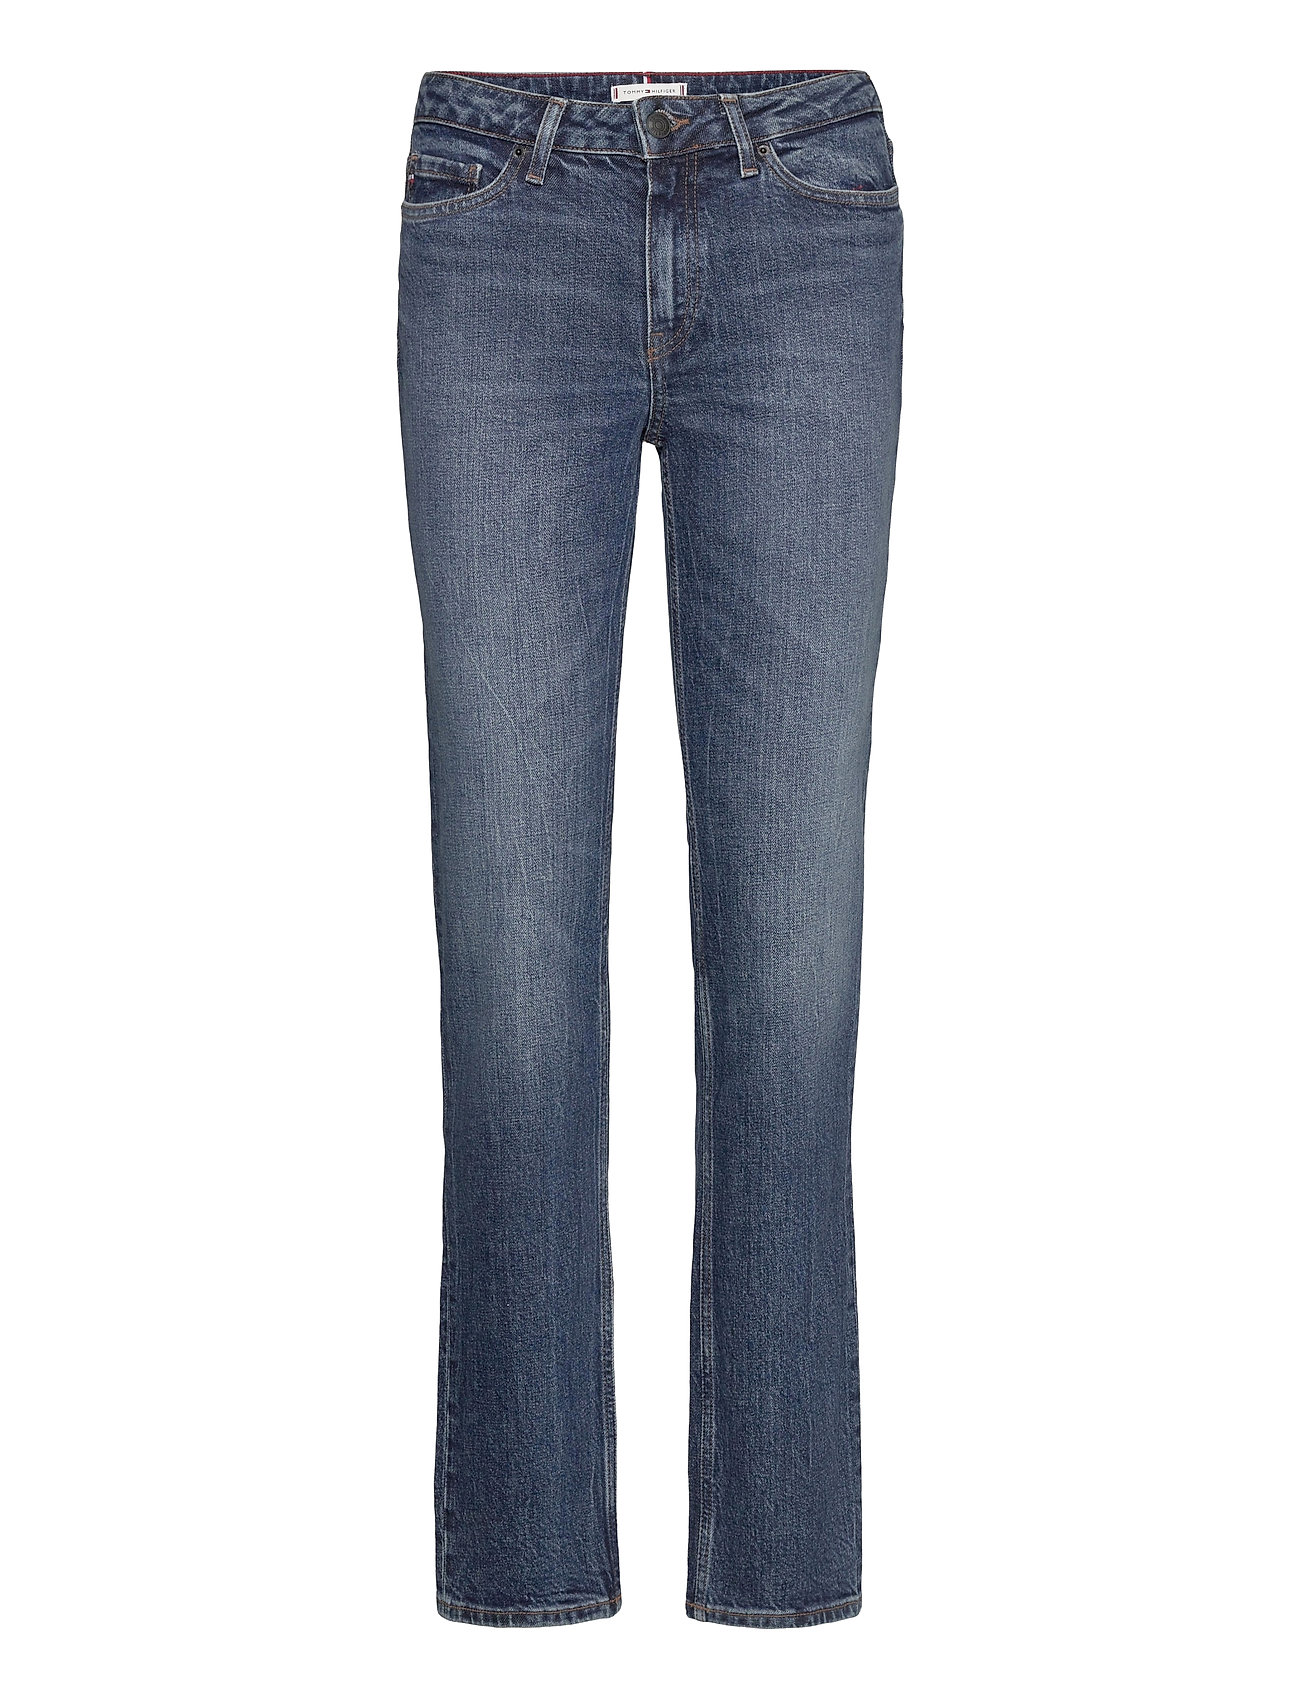 LUCY Tommy Hilfiger Rome Straight Rw Lige Blå Tommy Hilfiger straight leg jeans dame - Pashion.dk